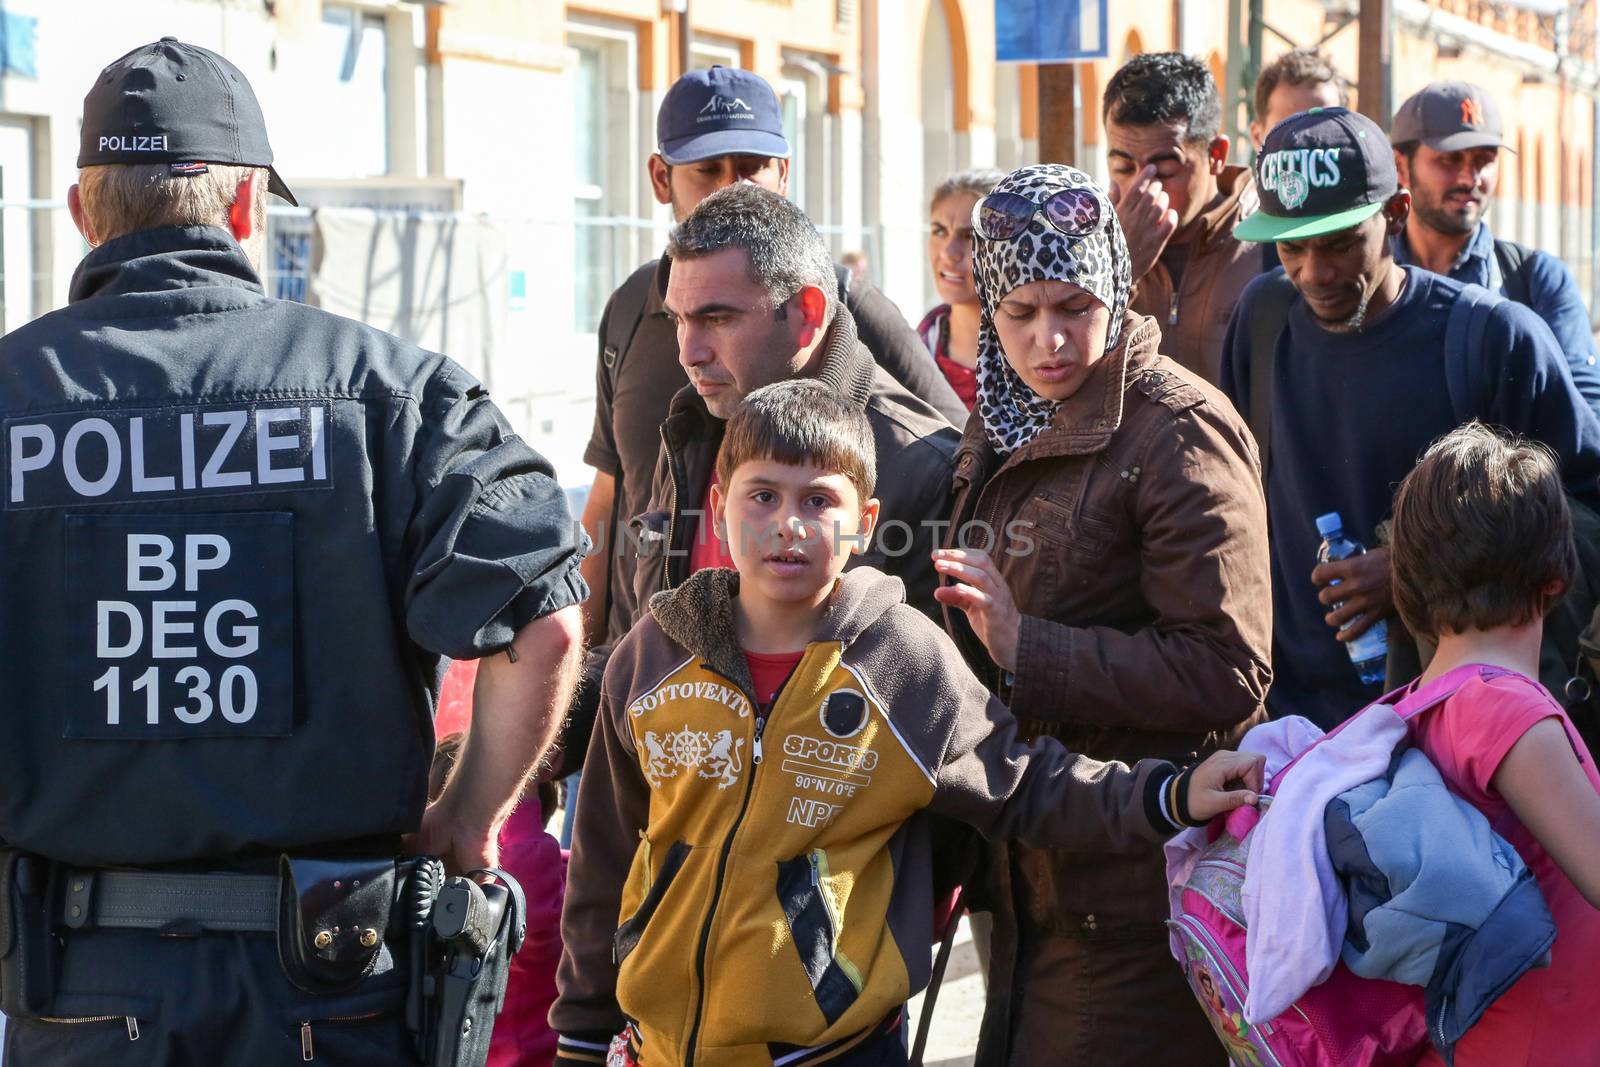 GERMANY, Passau: Security officials stand guard as refugees wait in long queues in the border town of Passau, Germany on September 21, 2015 amid the reintroduction of border controls in Germany, Austria, and a number of other EU countries, aimed at slowing the flow of refugees from war-torn Syria.